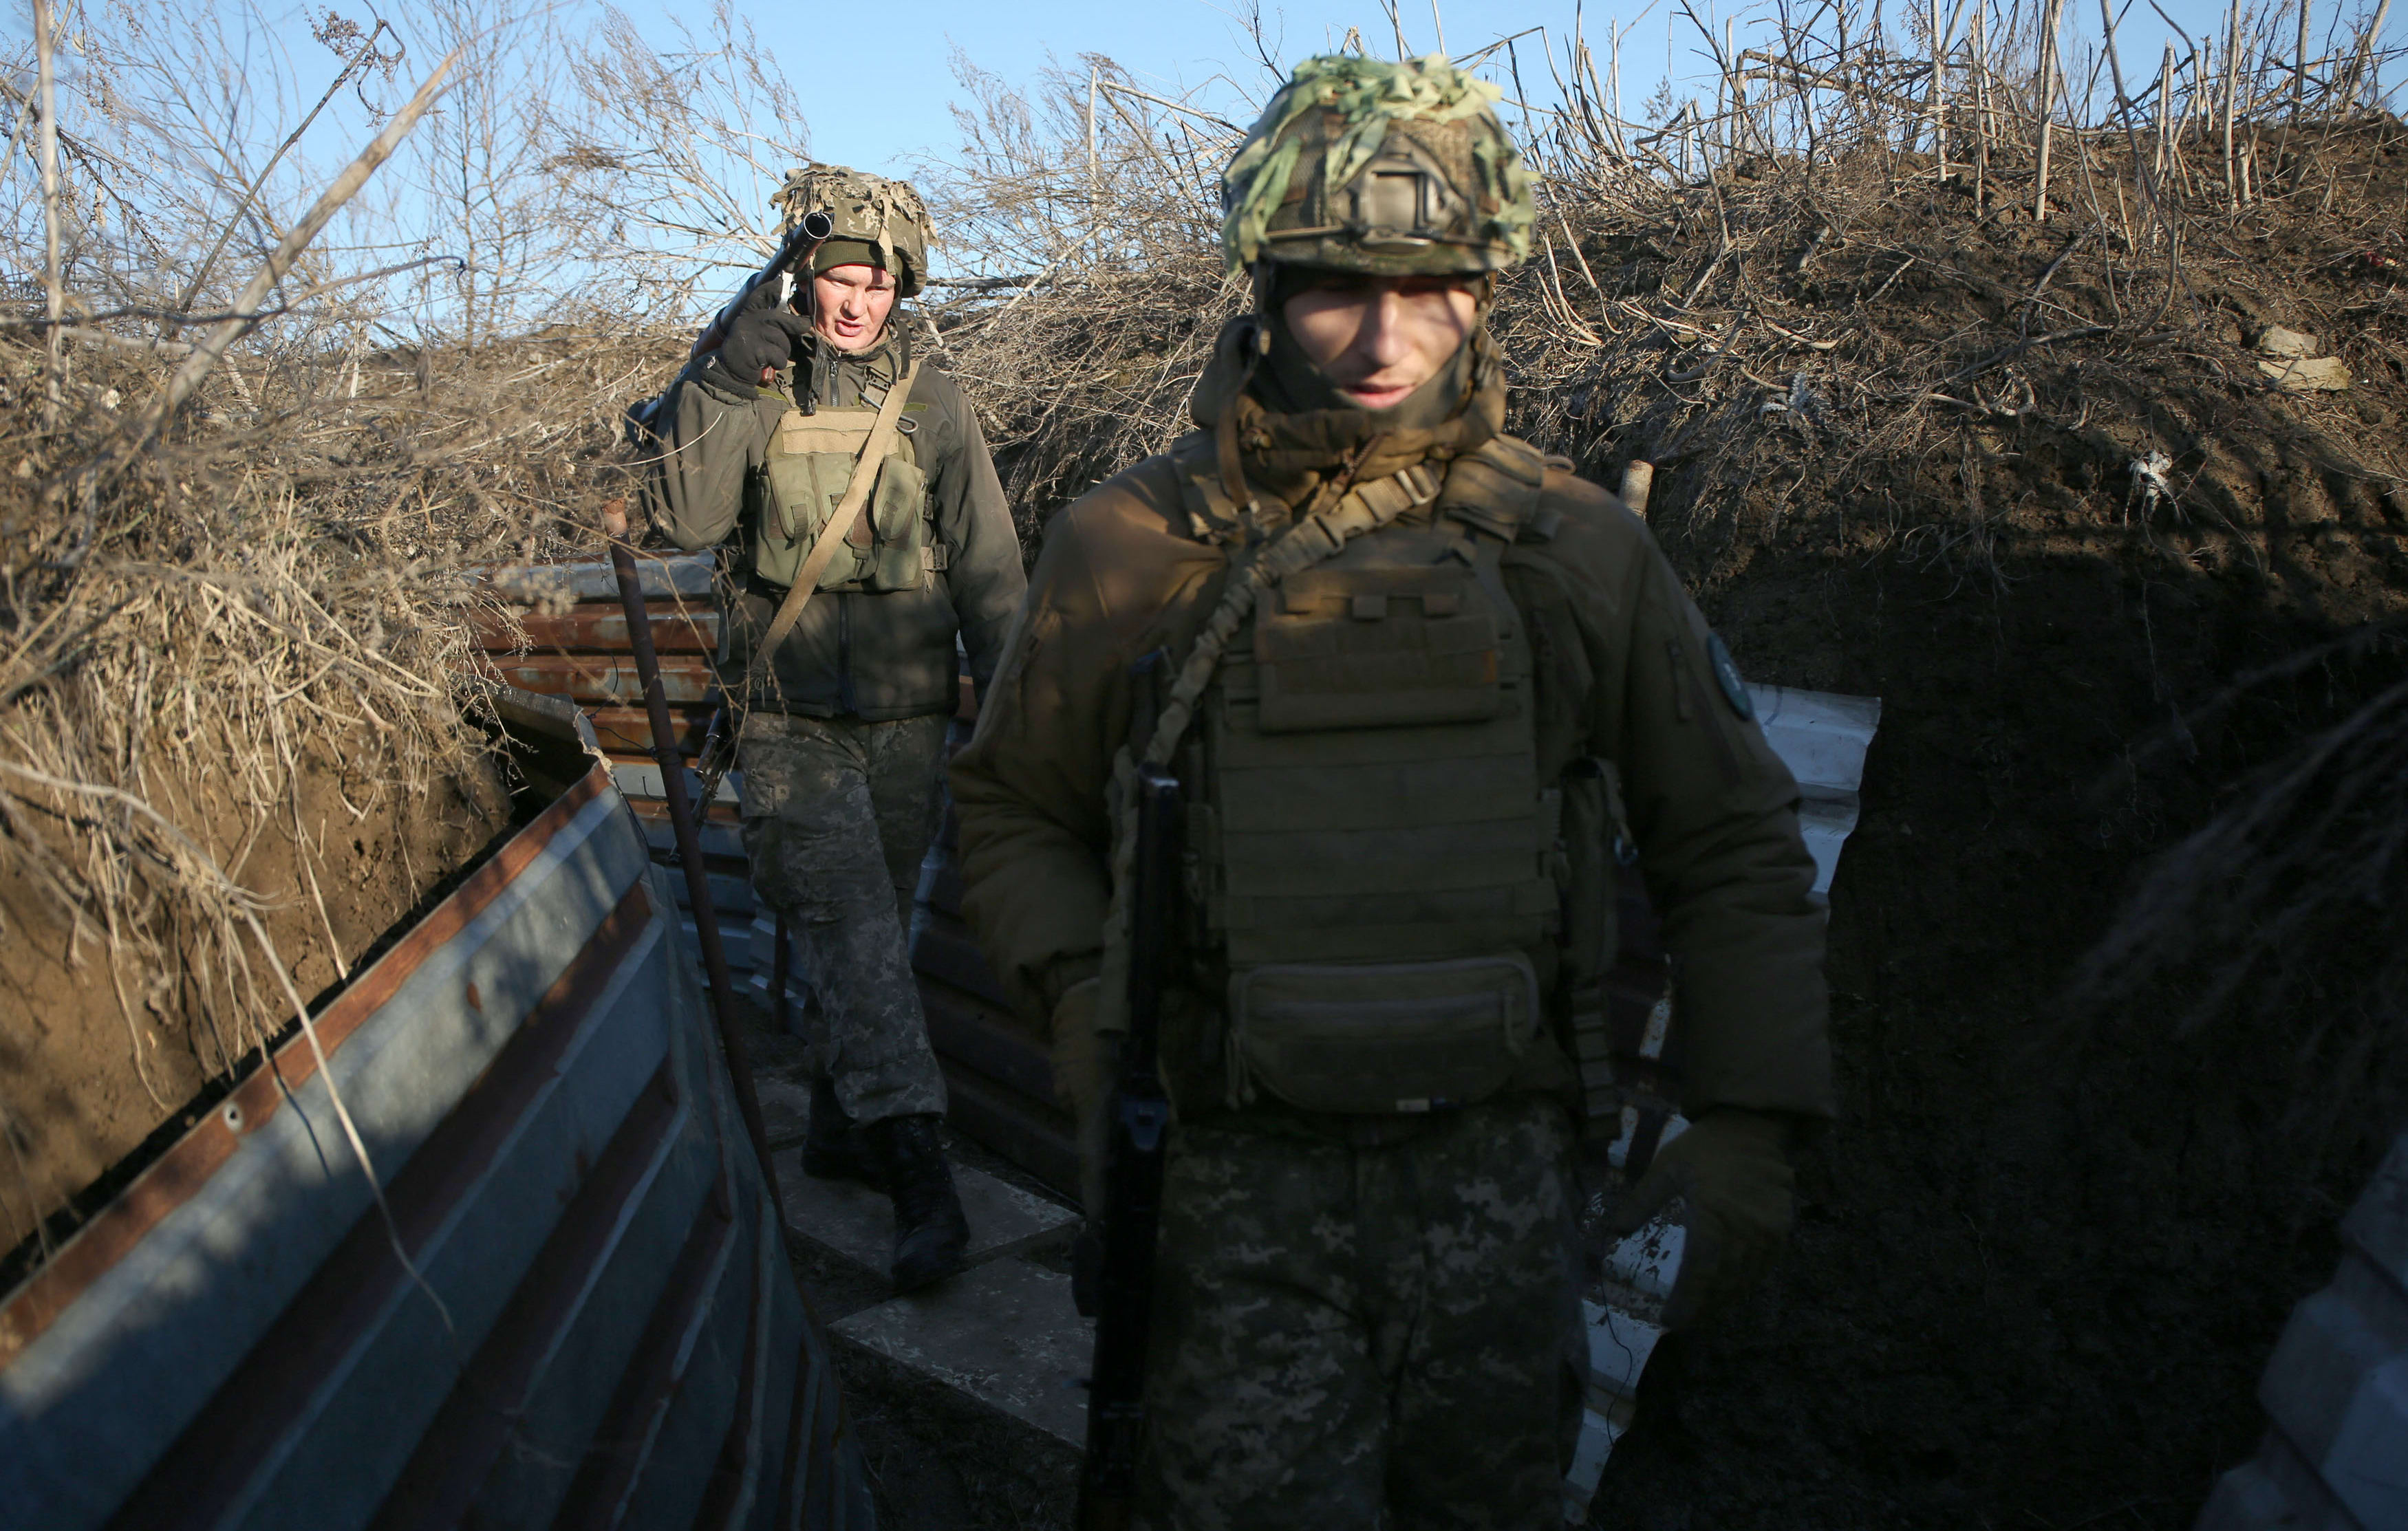 Ukrainian Territorial Defense Forces, the military reserve of the Ukrainian Armes Forces walk on a trench on the frontline facing Russia-backed separatists near to Avdiivka, southeastern Ukraine, on Saturday.